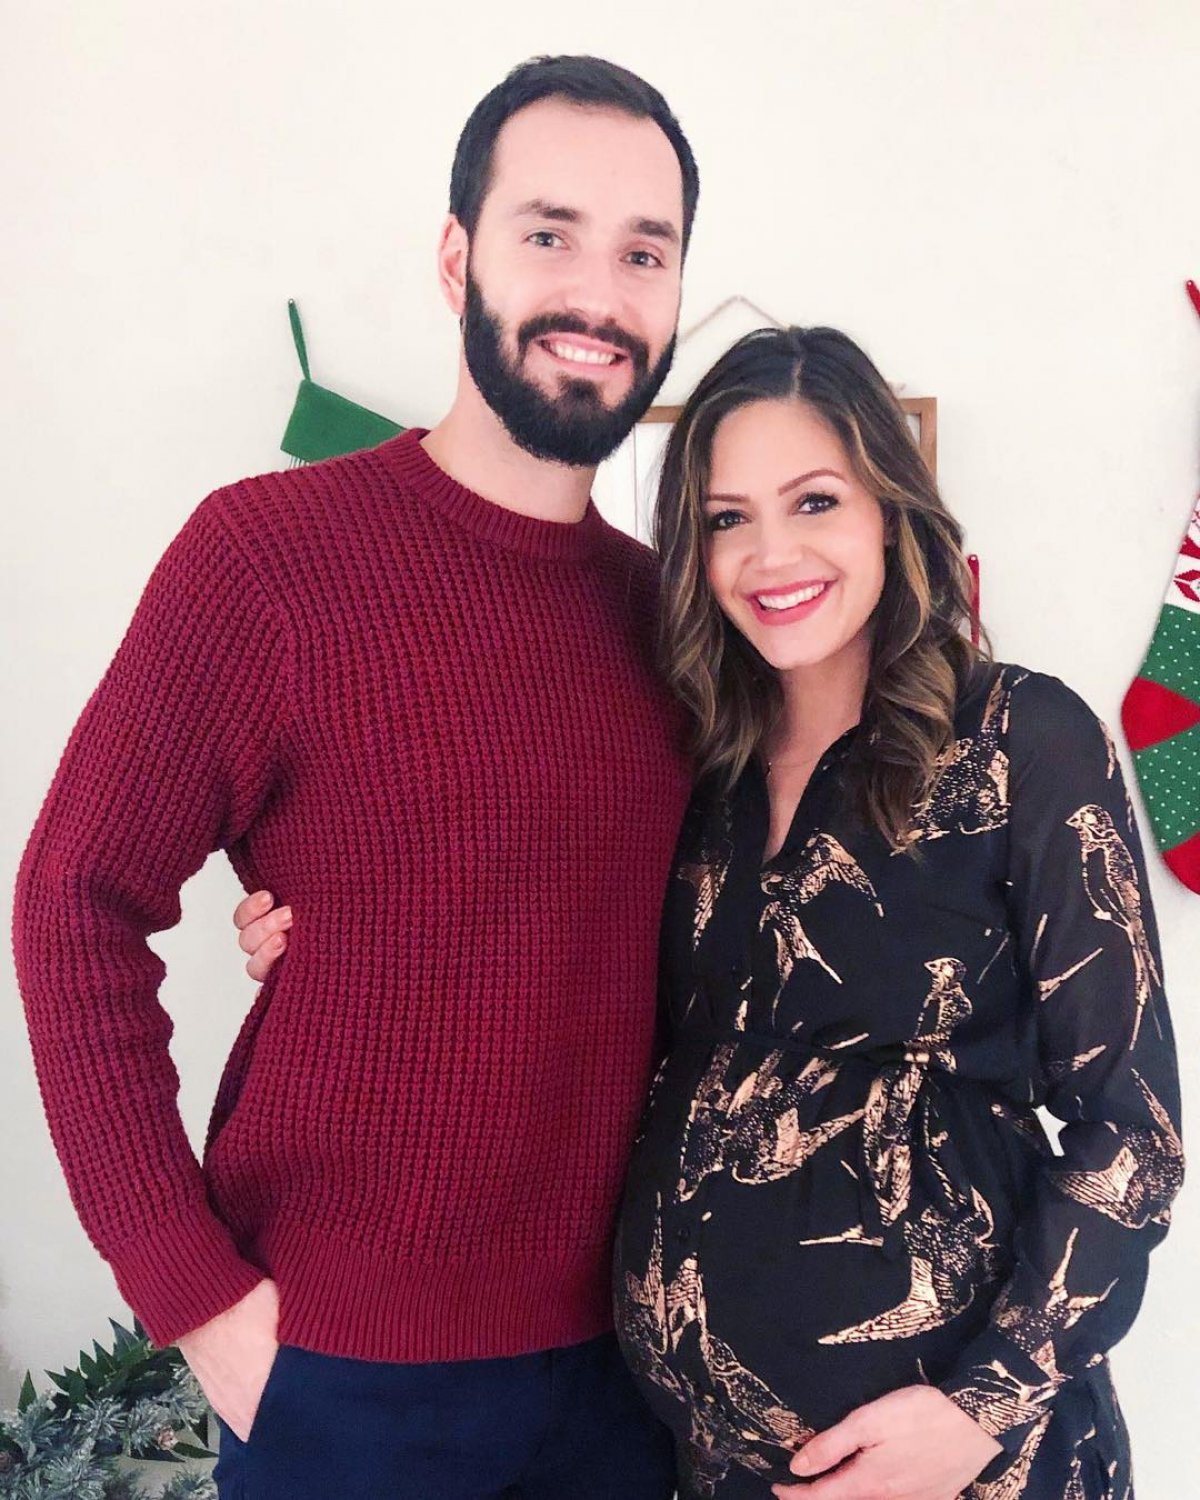 'The Bachelorette' couple Desiree Hartsock and Chris Siegfried welcome second baby ...